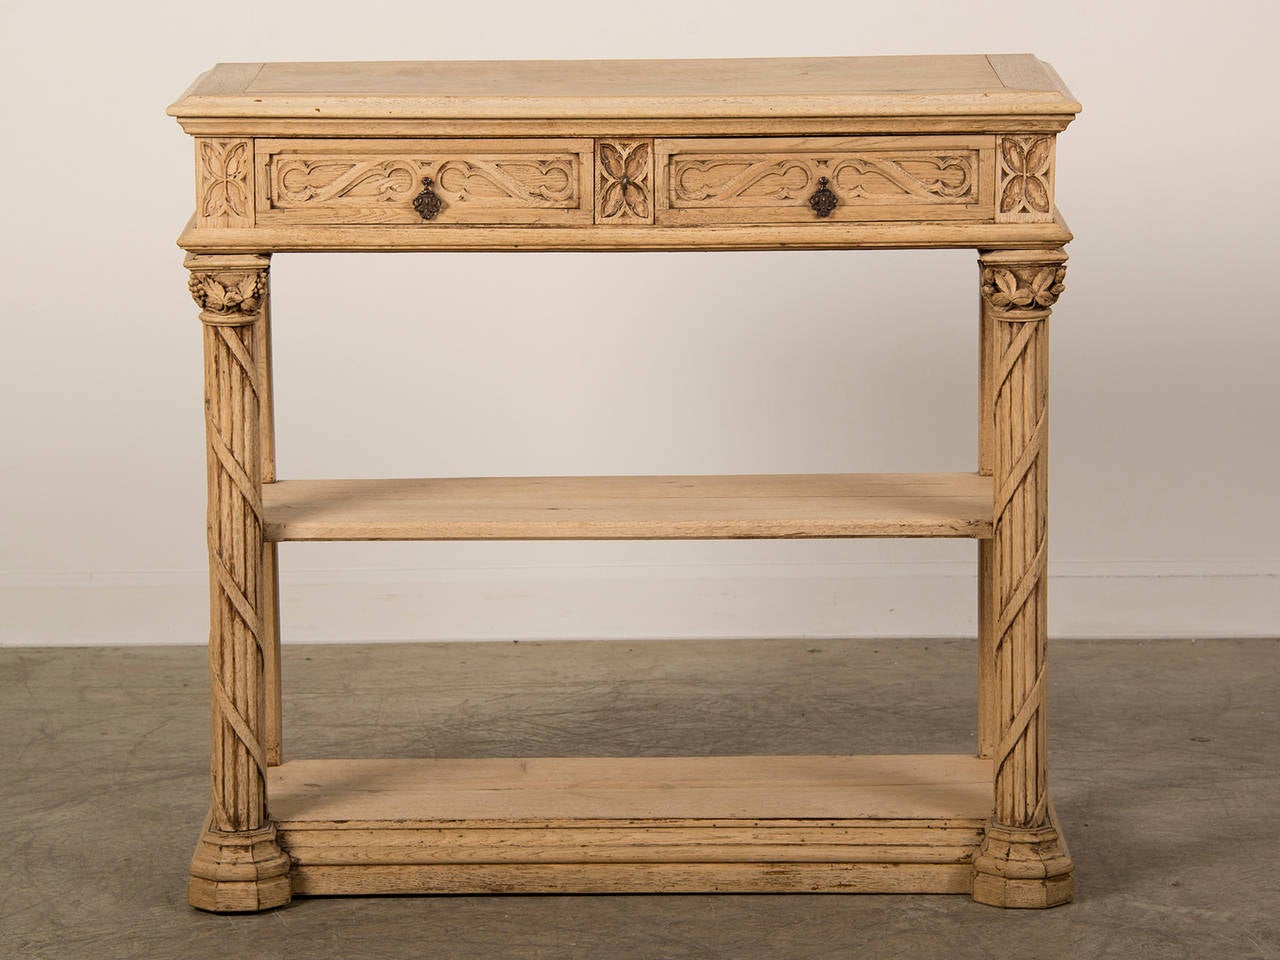 A Renaissance style carved oak desserte from France c. 1880 having a pale colouration. Please notice the striking combination of the carved columns on the left and right each entwined with a ribbon and capped with a carved capital of fruit and